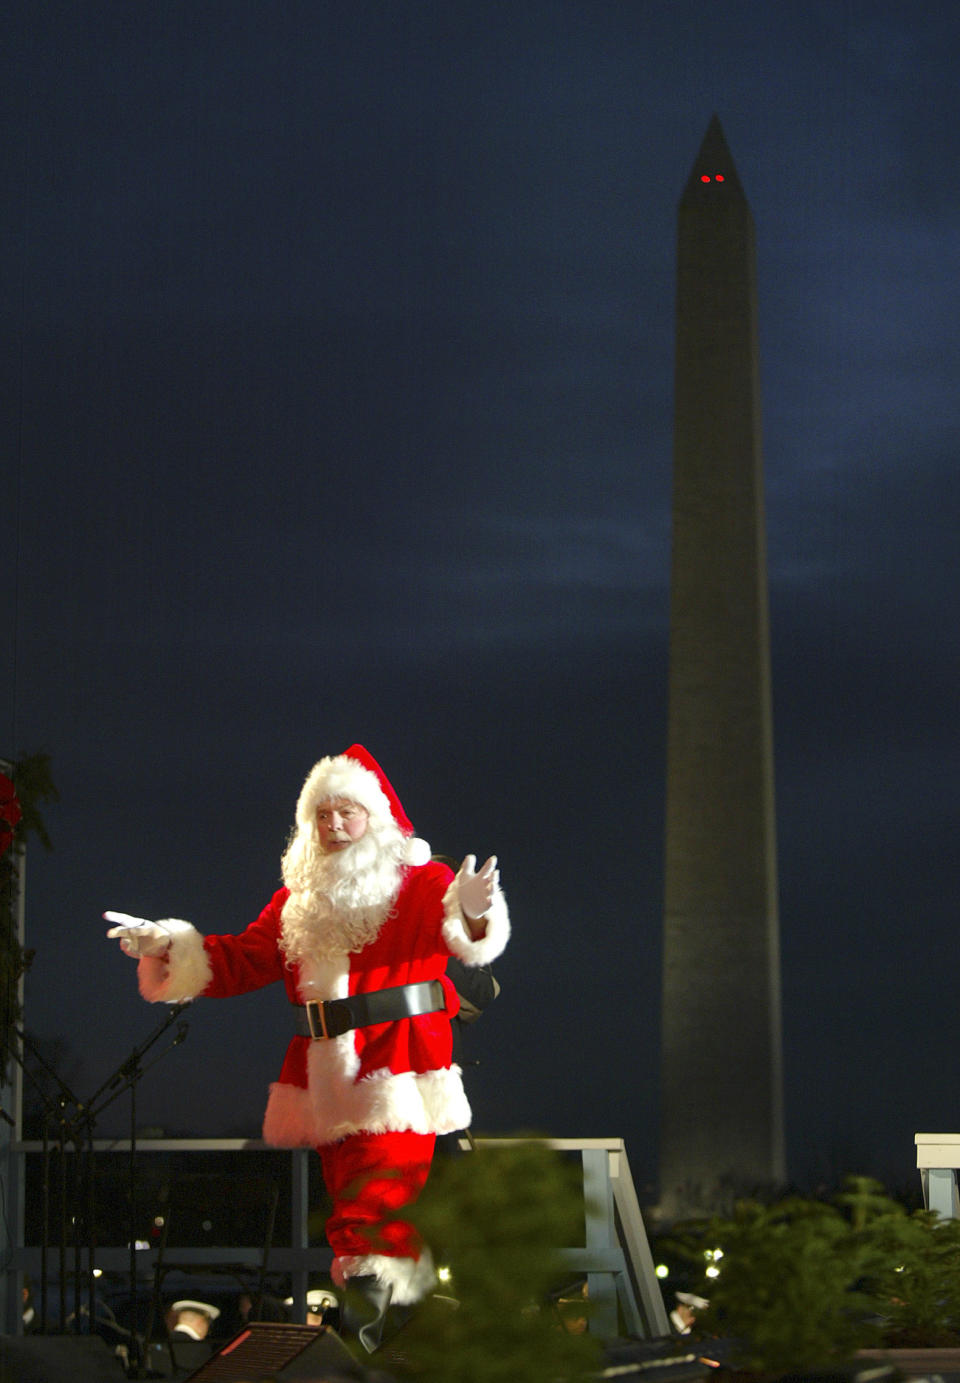 Merlin Olsen, dressed as Santa Claus, arrives on stage to participate in the Pageant of Peace on the Ellipse near the White House, Thursday, Dec. 1, 2005, in Washington. President Bush and his wife, Laura, participated in the event by making a few remarks and lighting the National Christmas Tree.(AP Photo/Lawrence Jackson)